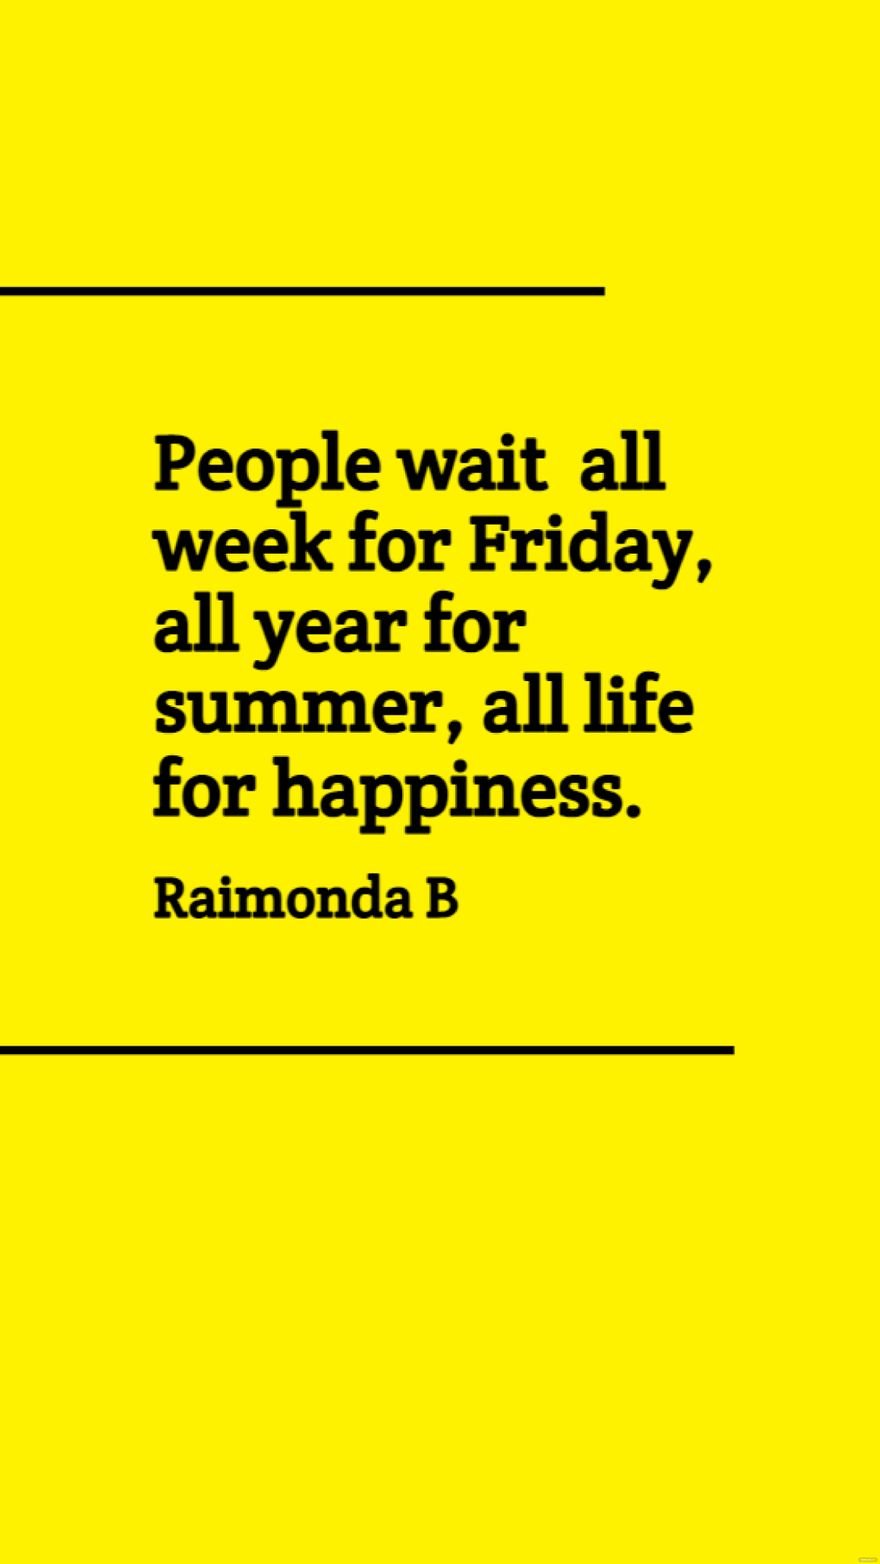 Raimonda B - People wait all week for Friday, all year for summer, all life for happiness.